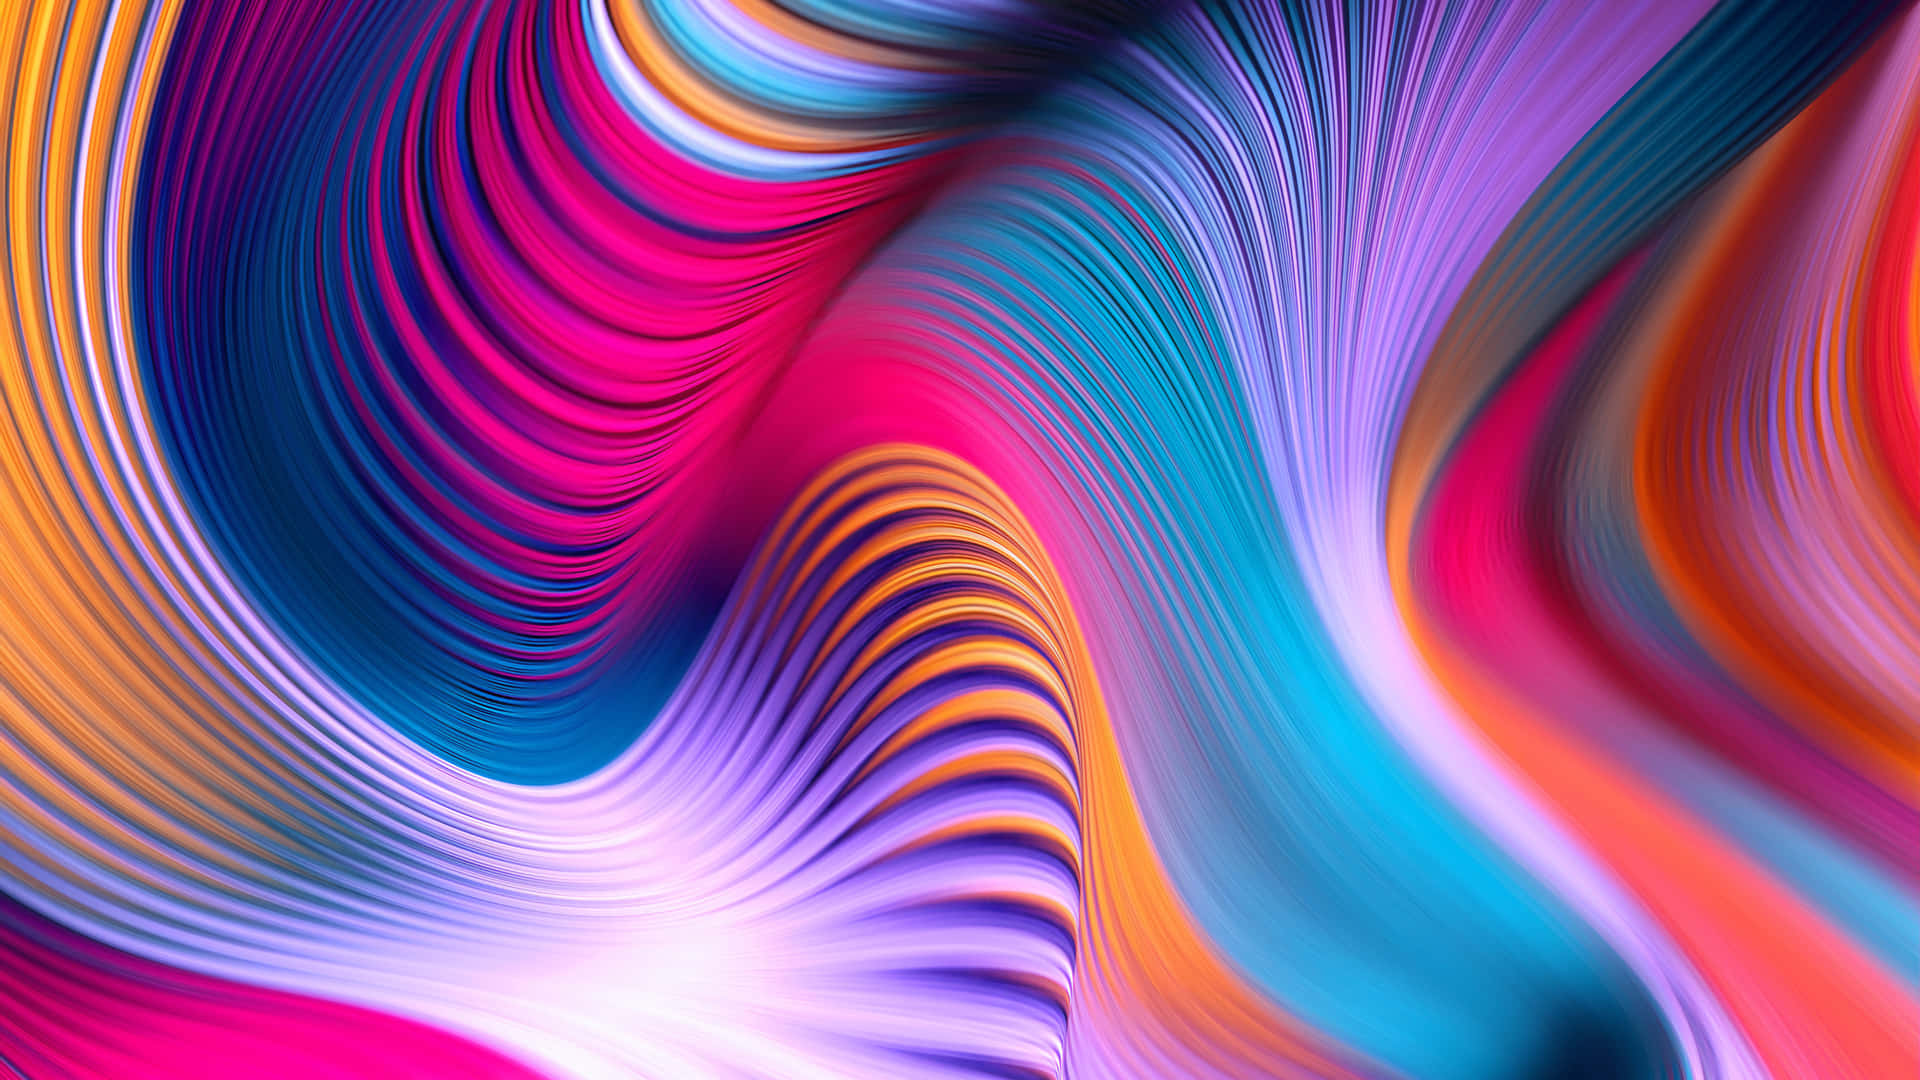 Vibrant Colorful Abstract Art Wallpaper